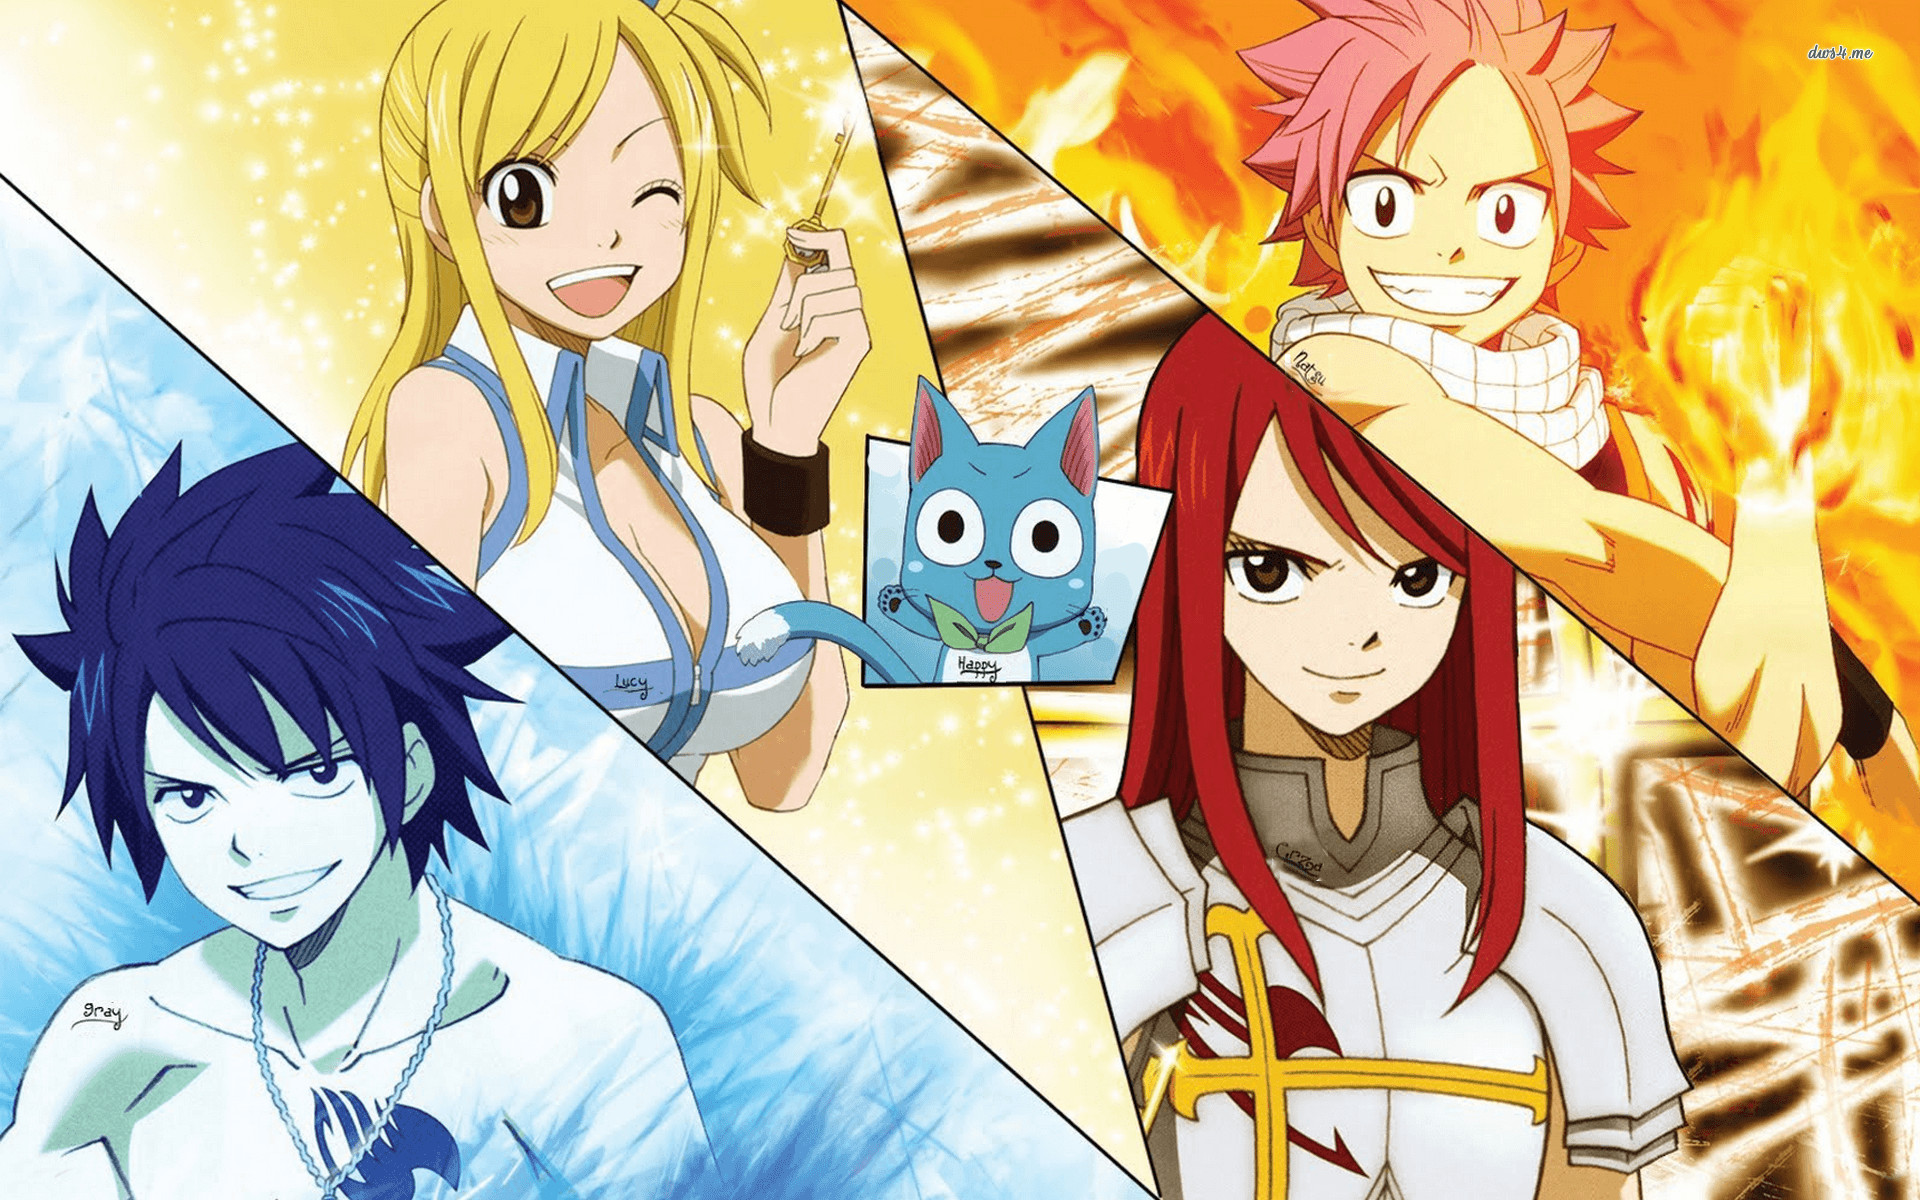 1920x1200 2880x1800 Natsu Dragneel - Fairy Tail [2] wallpaper - Anime wallpapers -  #26457">